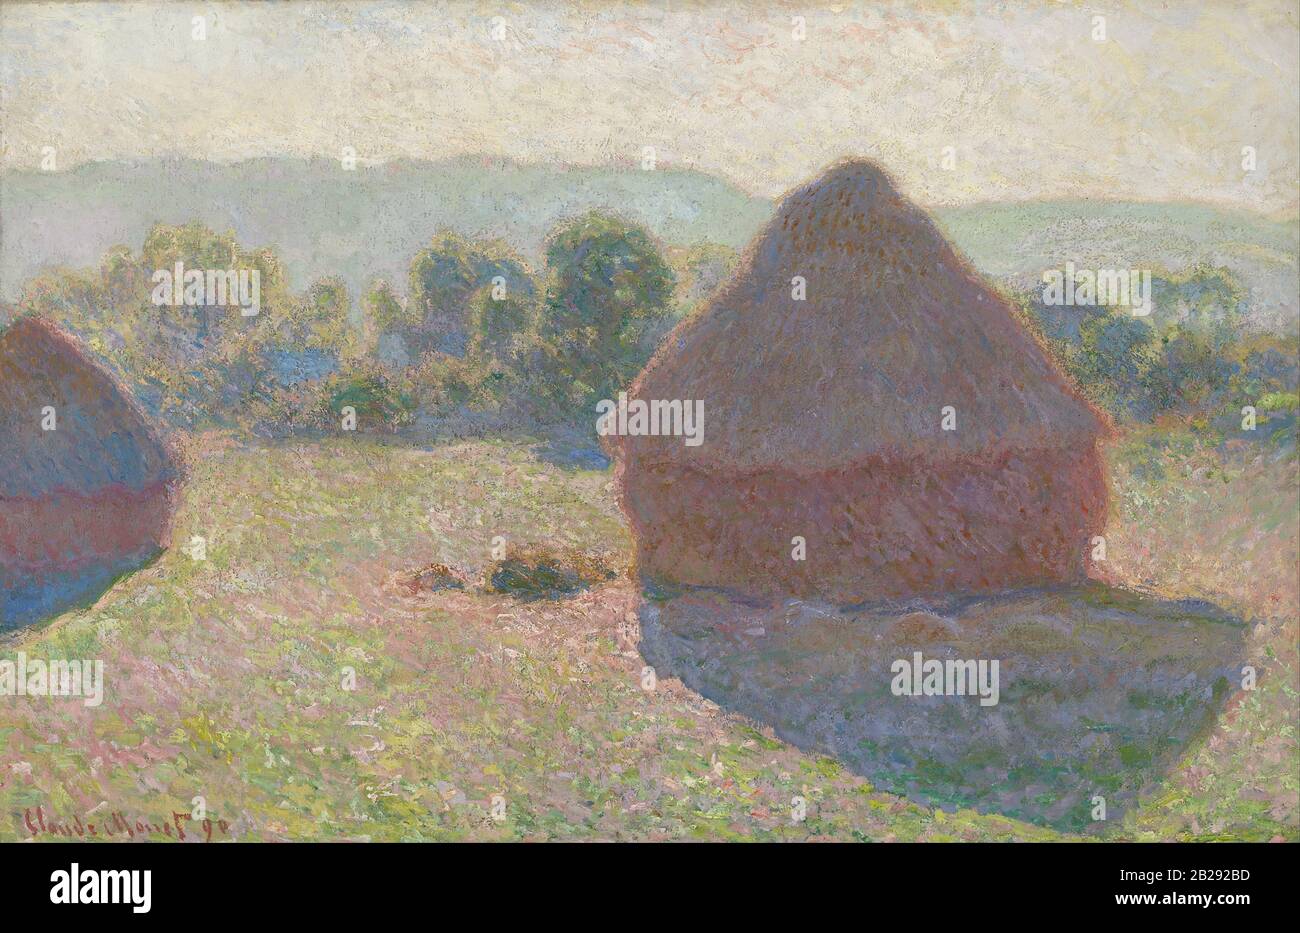 Haystacks, Midday (1890) Painting by Claude Monet - Very high resolution and quality image Stock Photo